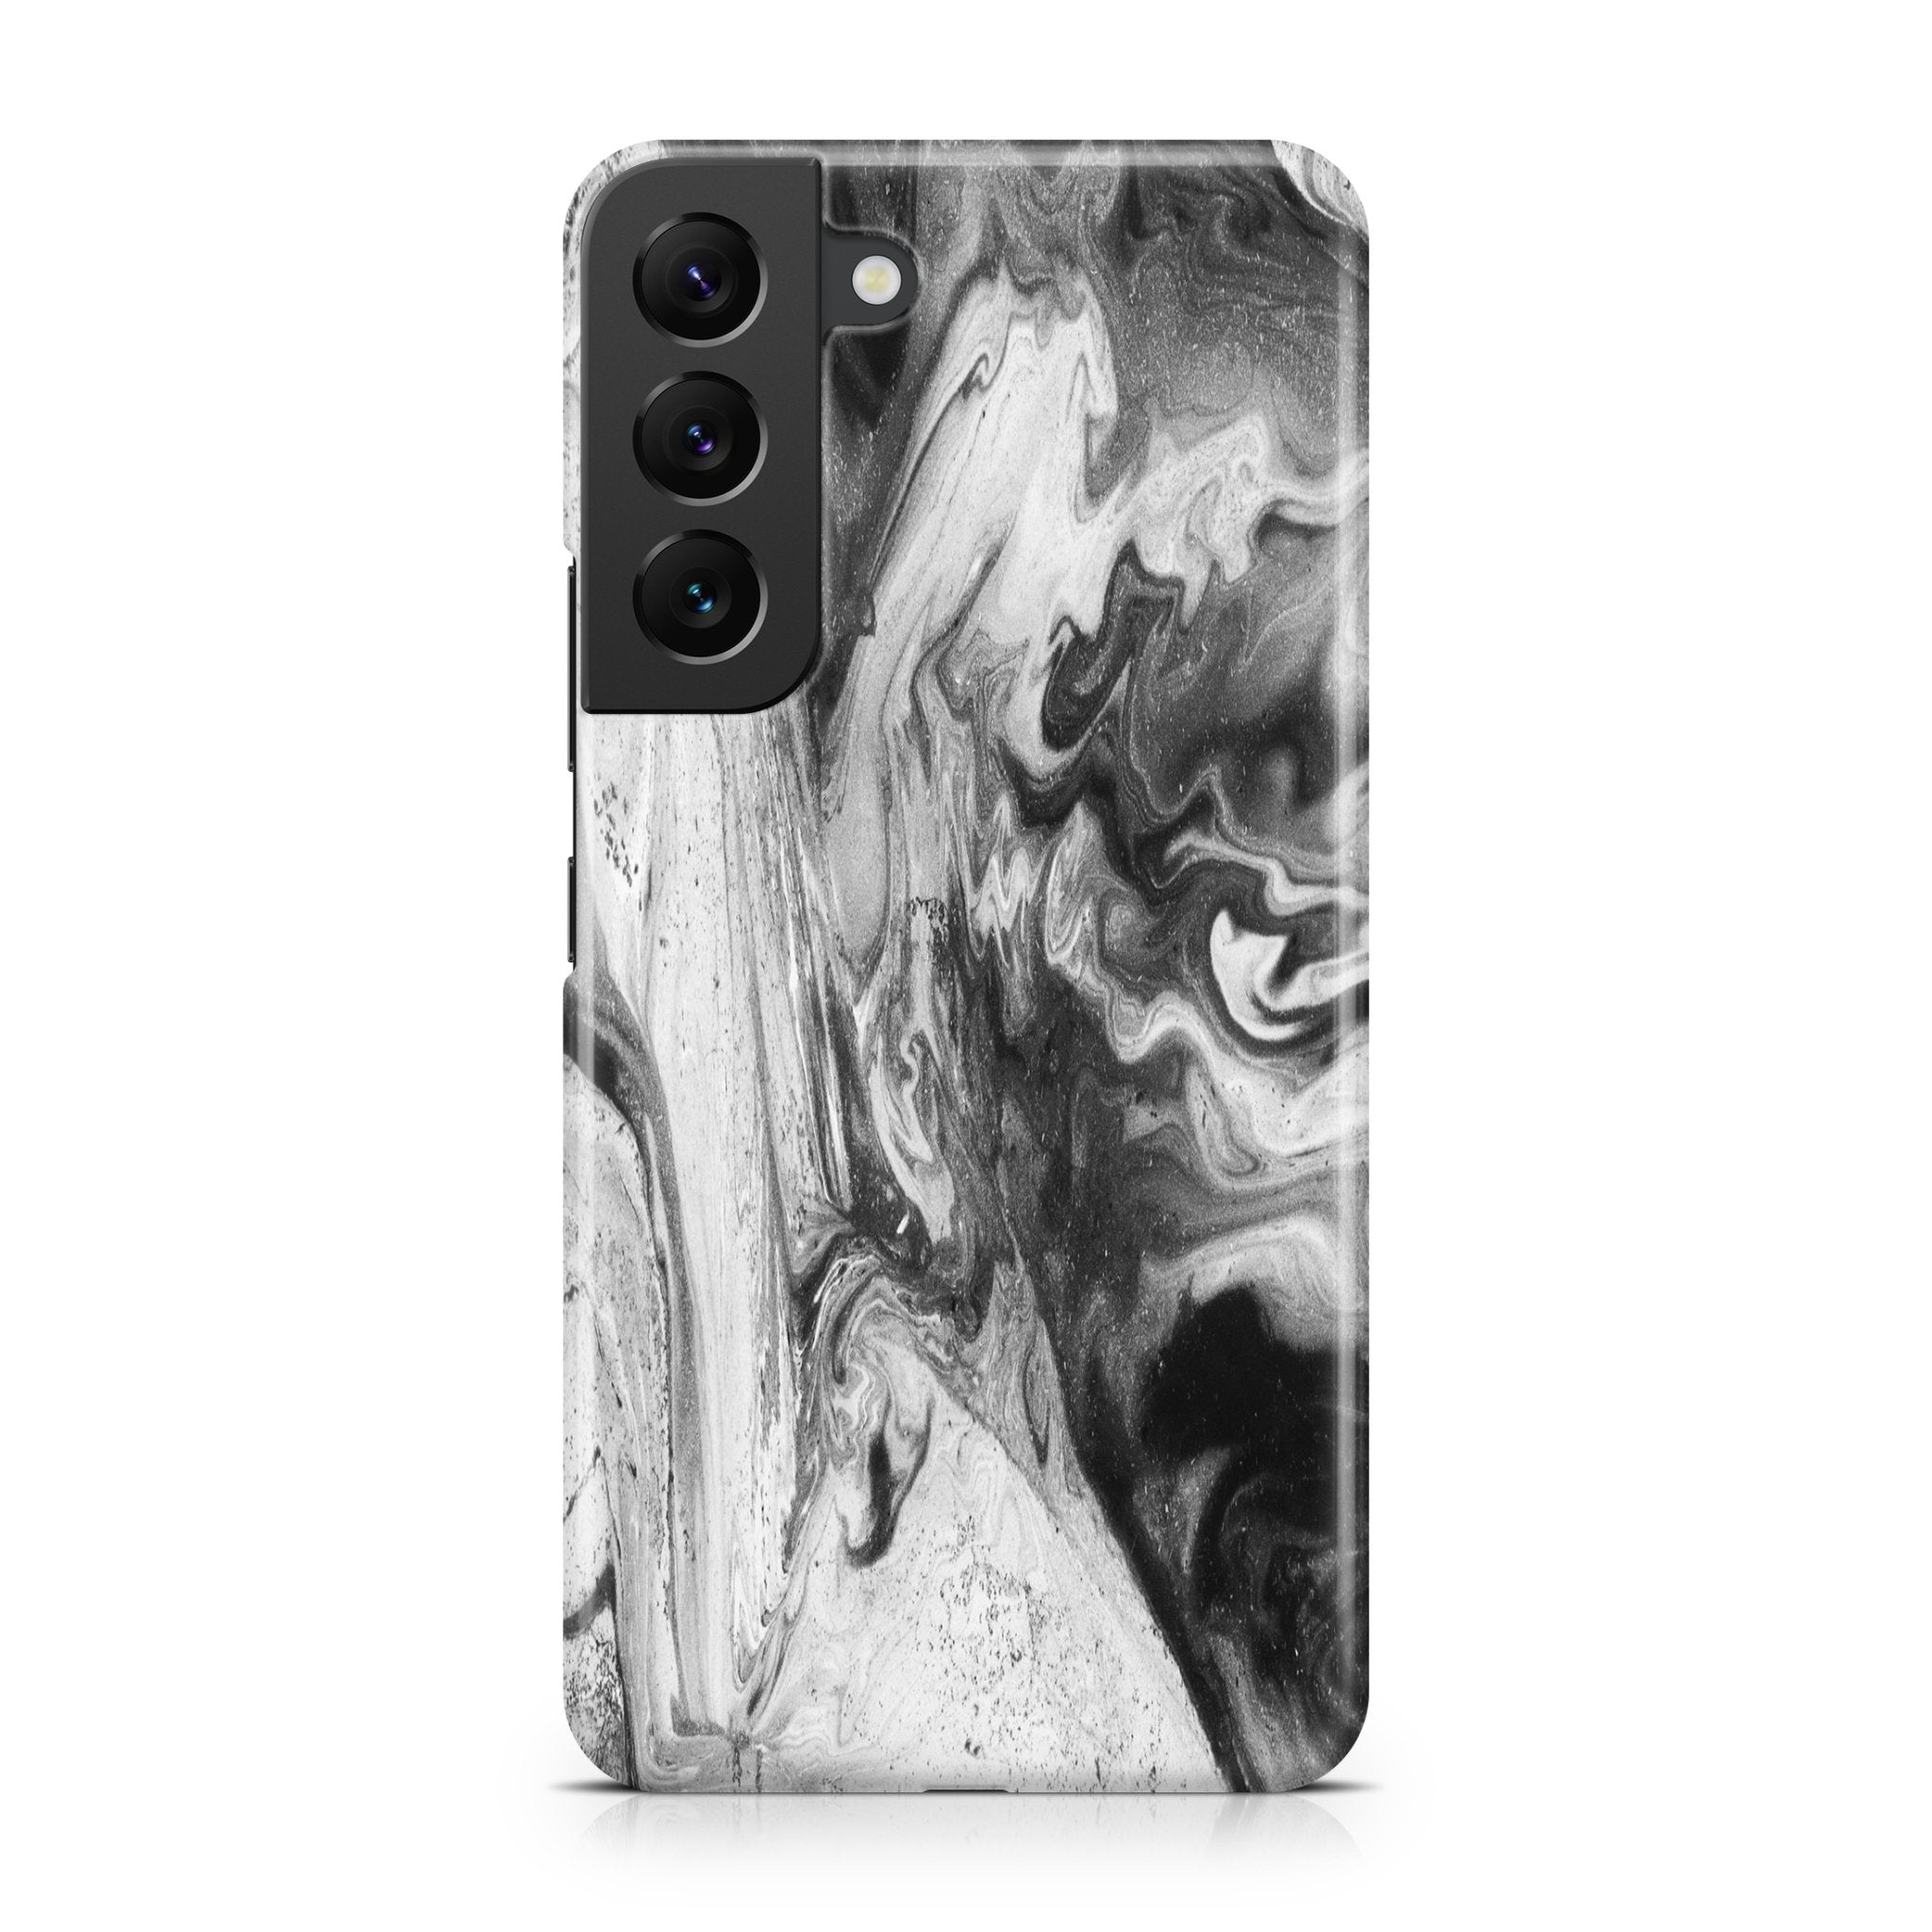 Black & White Marble Series I - Samsung phone case designs by CaseSwagger